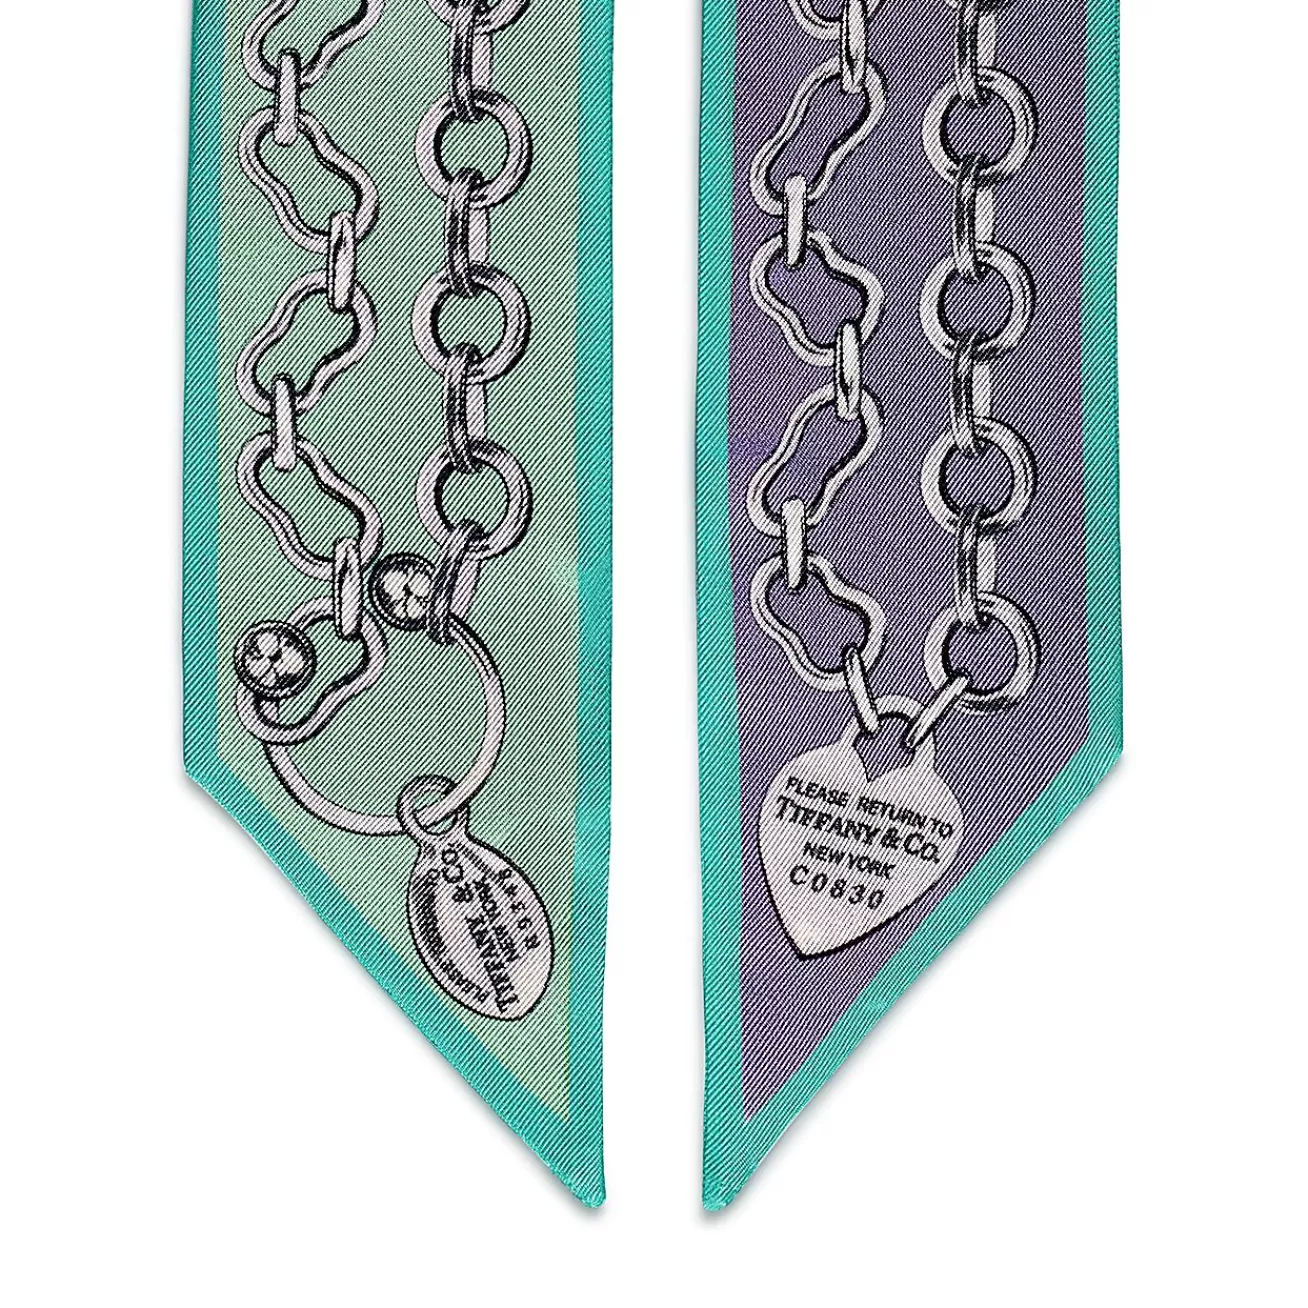 Tiffany & Co. Return to Tiffany® Chains Ribbon Scarf in Jade-colored and Lavender Silk | ^Women Scarves & Stoles | Women's Accessories